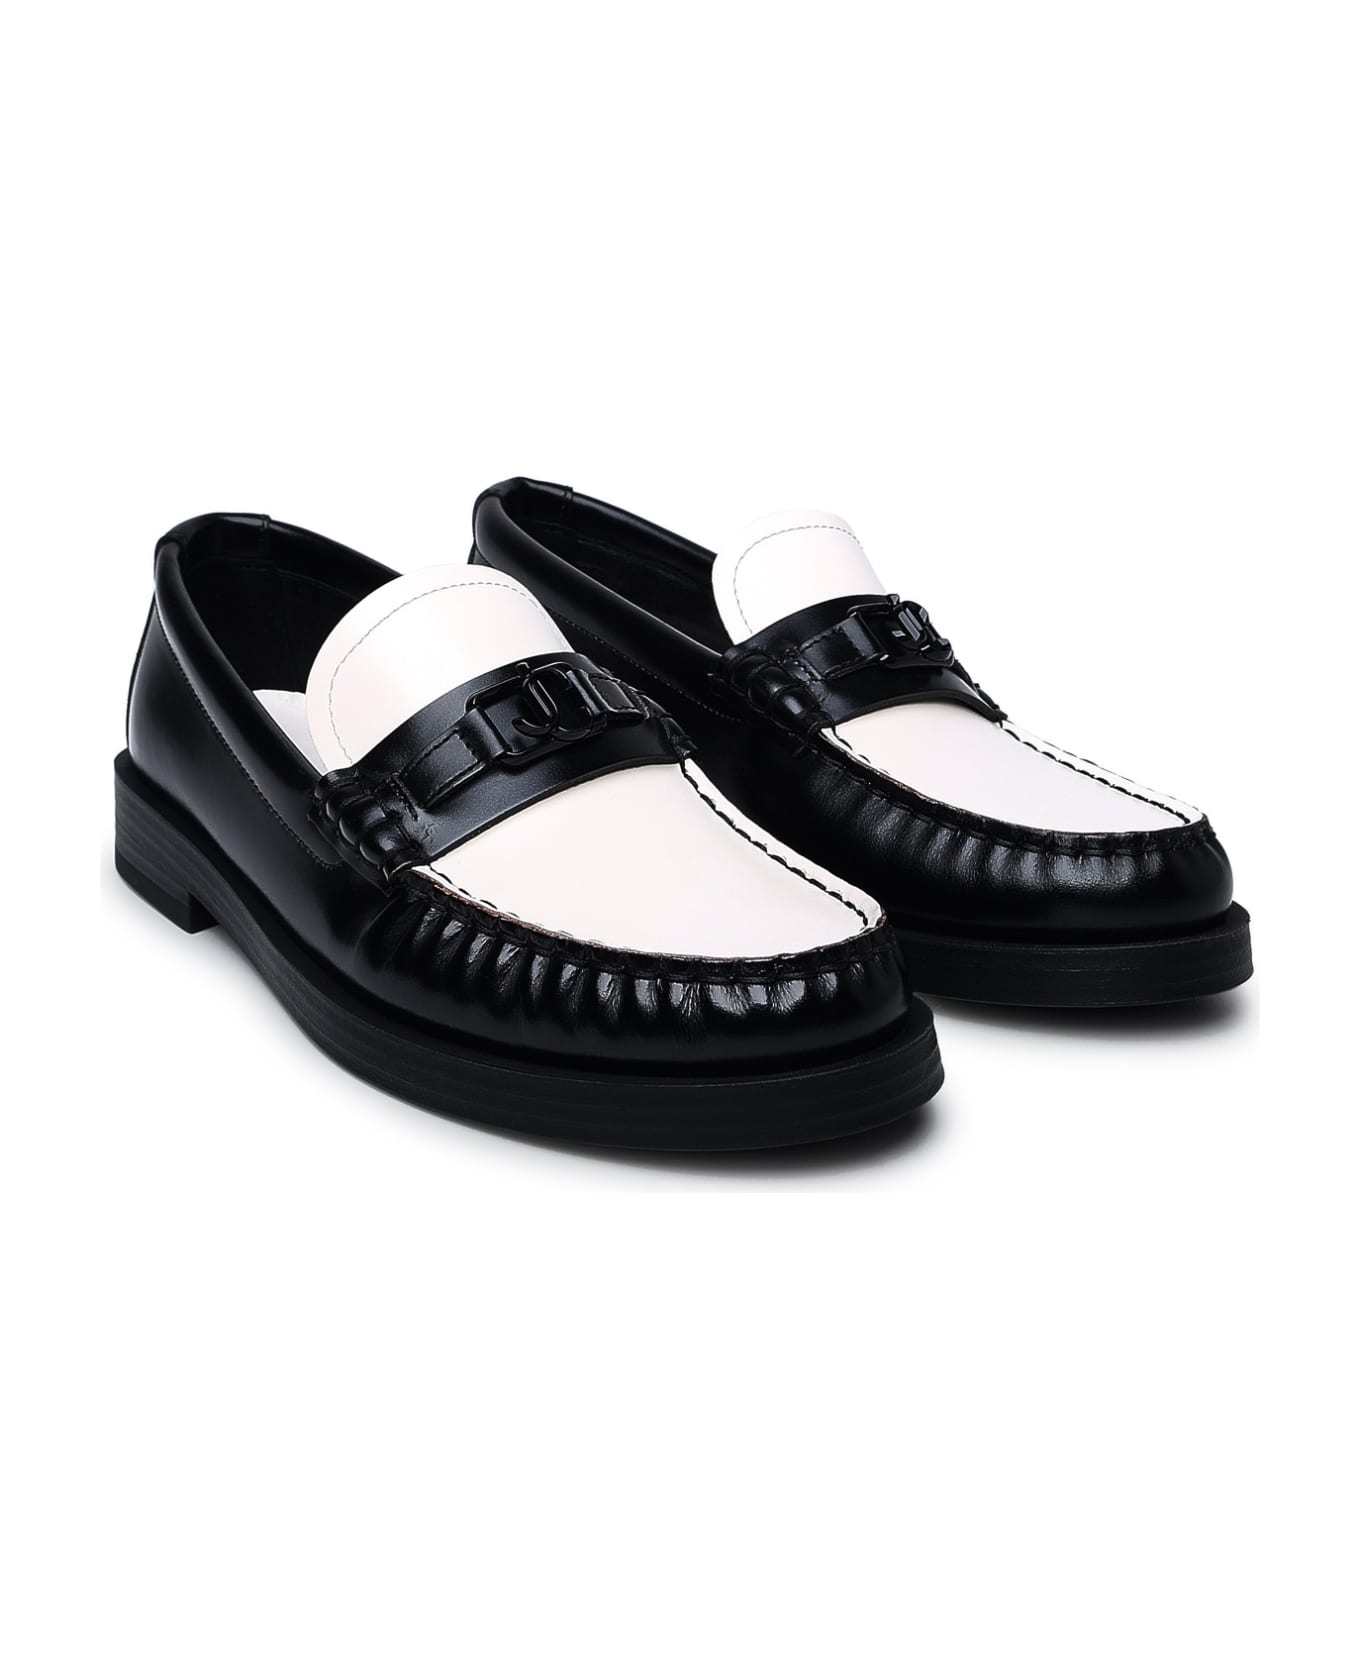 Jimmy Choo Two-tone Leather Loafers - Black フラットシューズ